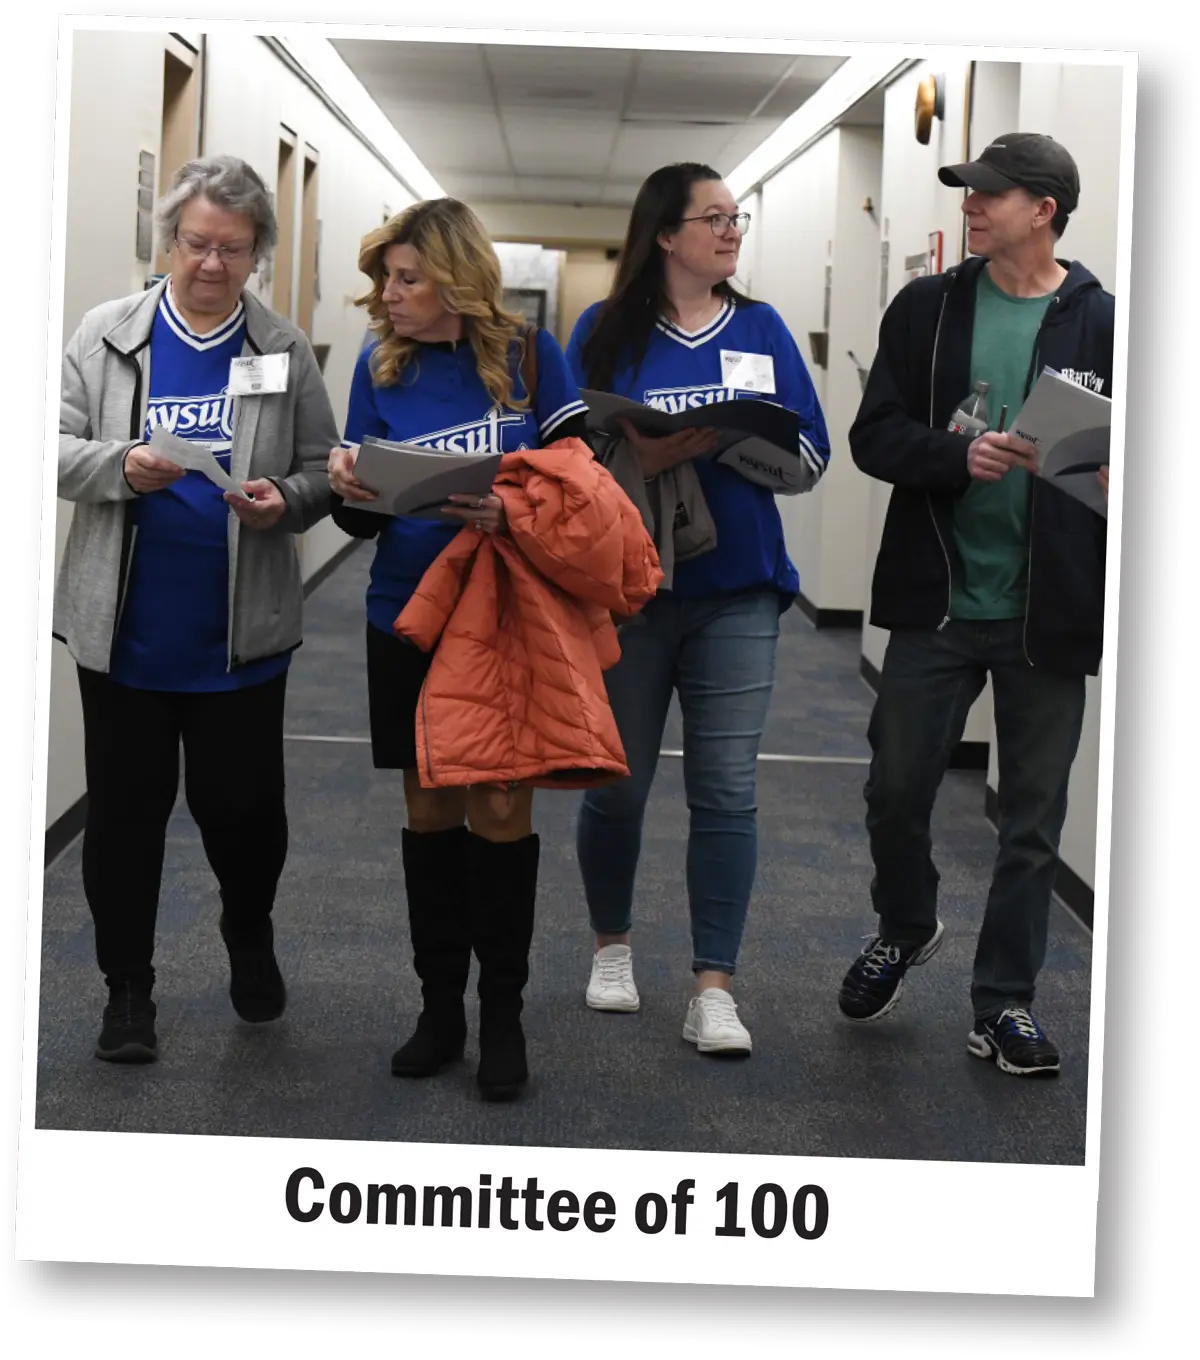 four members of the Committee of 100 walk down a hall and hold papers and folders while deep in discussion